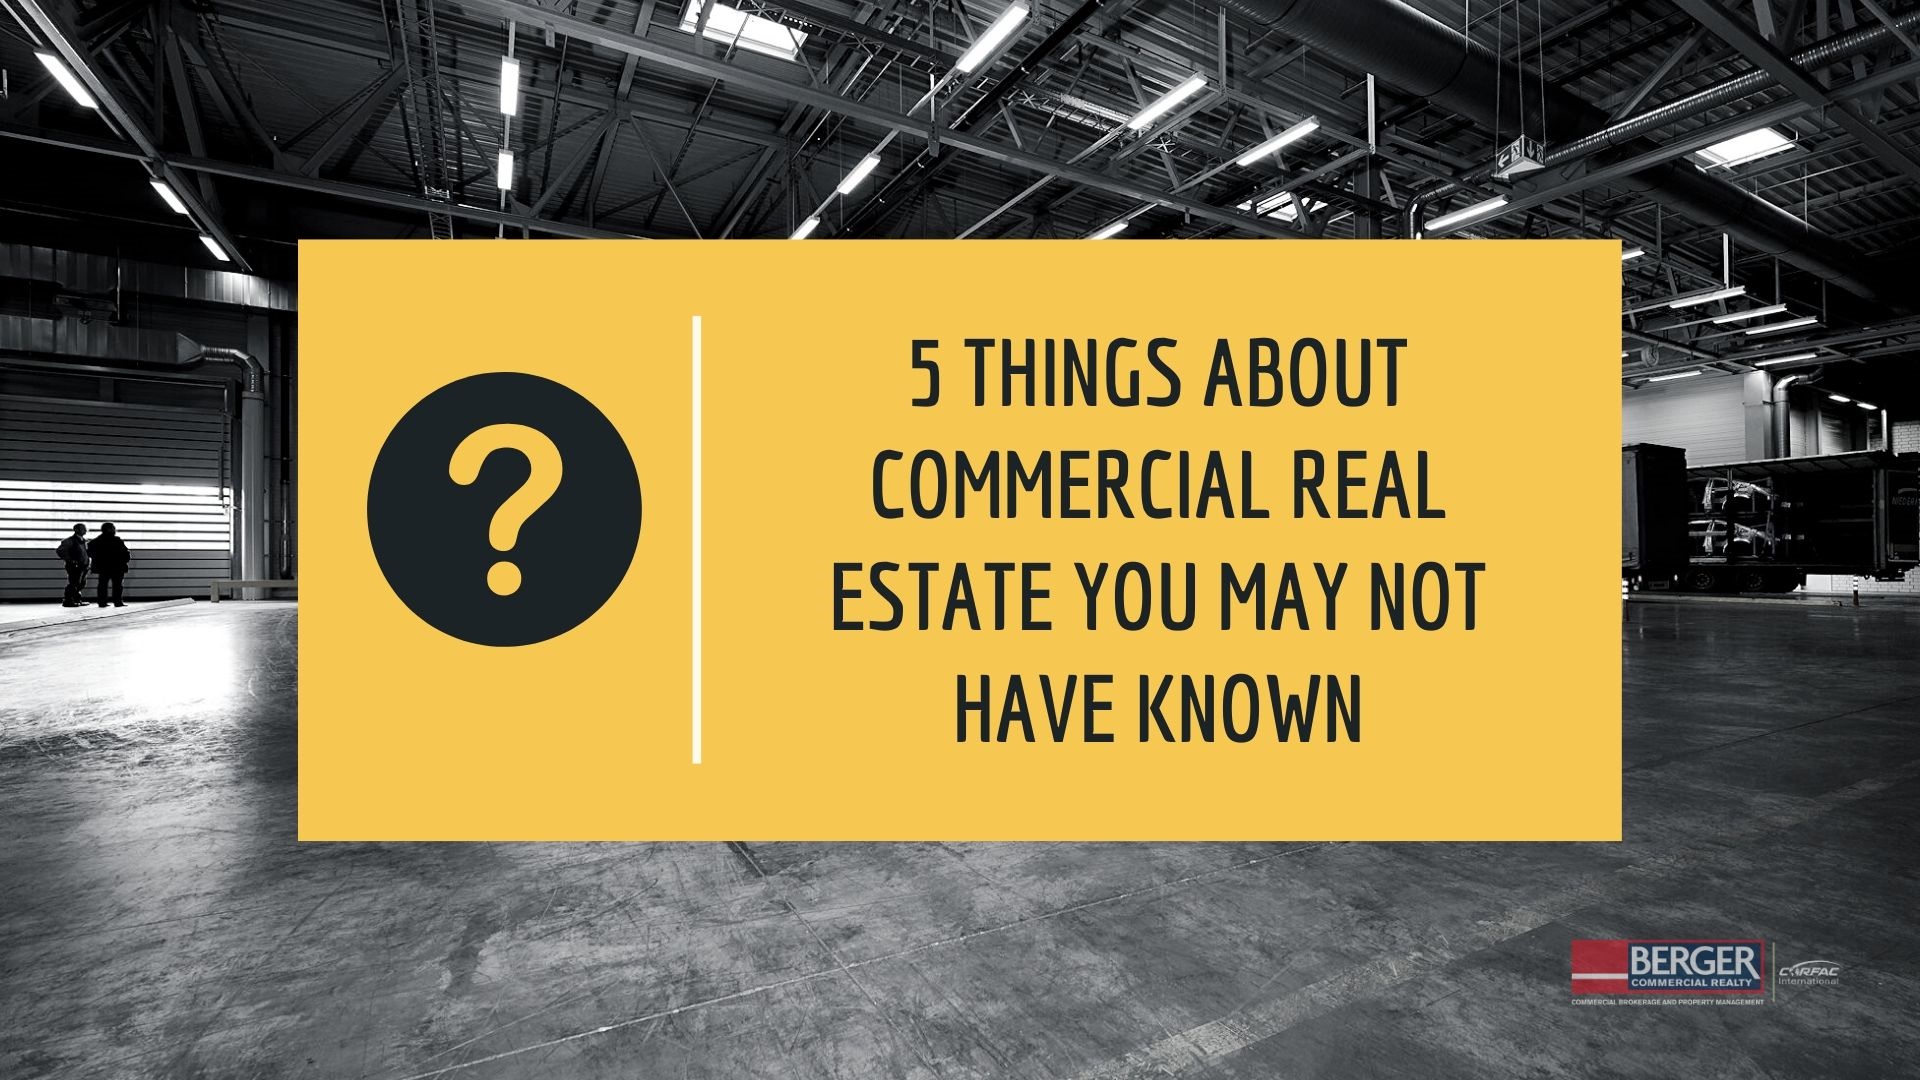 Five Things About Commercial Real Estate You May Not Have Known